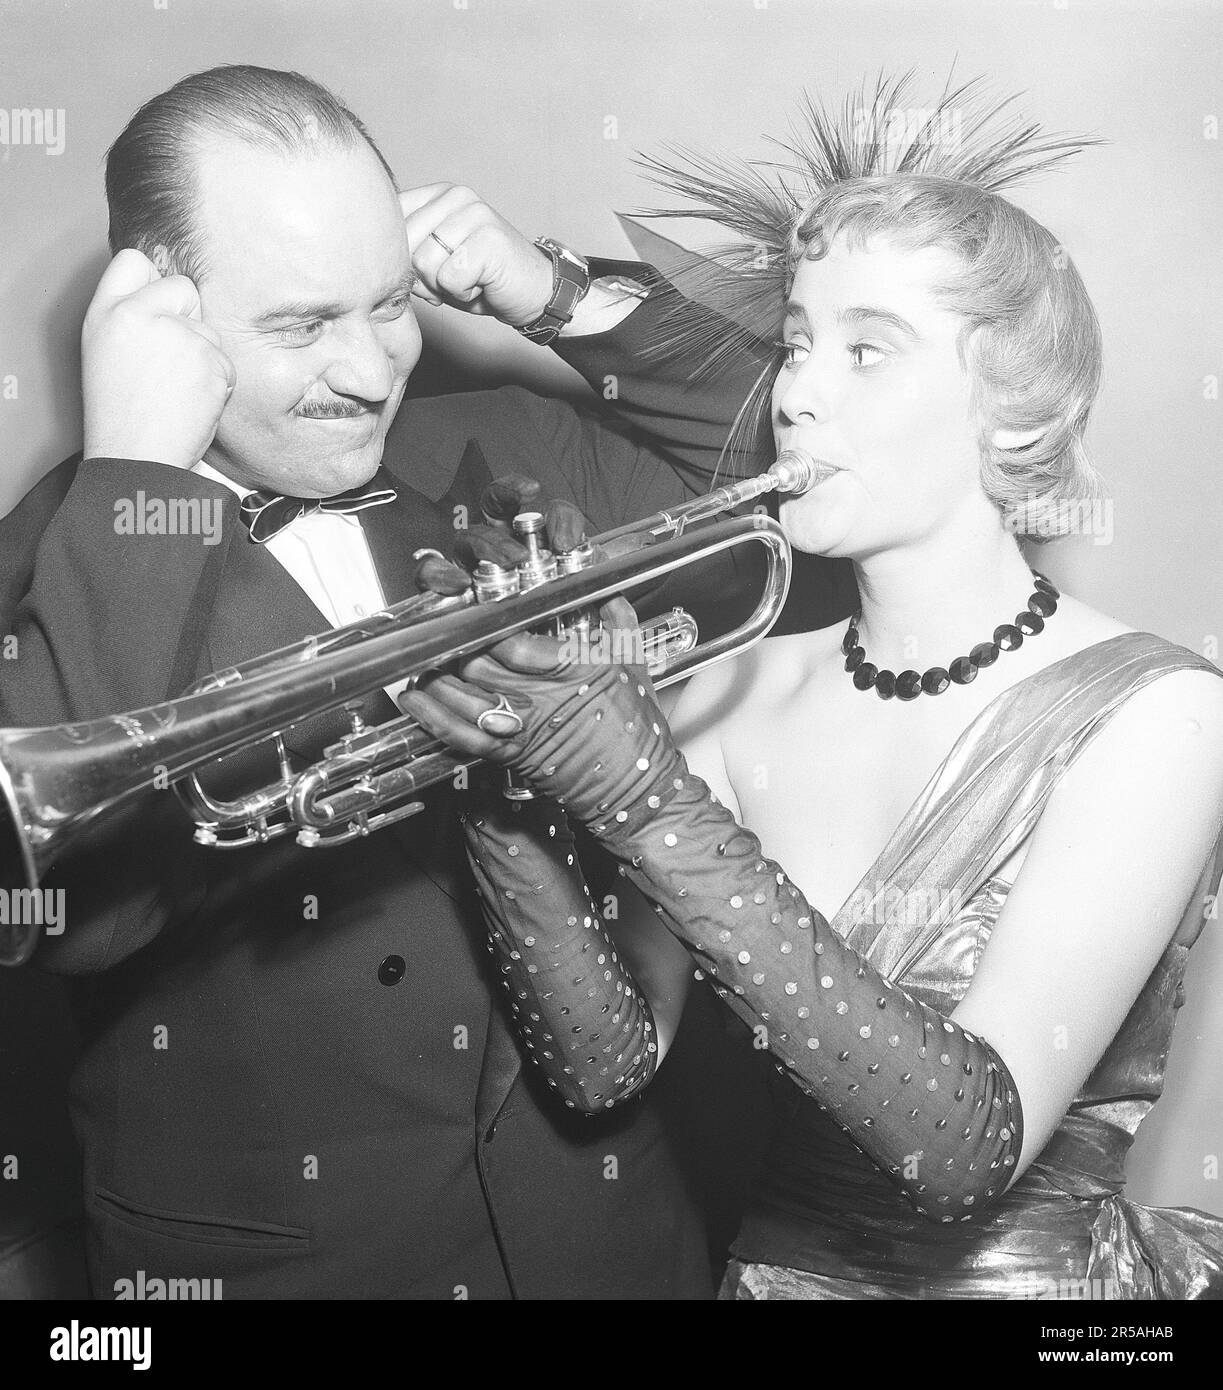 A young woman wearing an evening dress and arm-length gloves plays the trumpet. Judging by the man next to her holding his ears, her musical skills probably leave a lot to be desired. Someone who cannot play the trumpet and who tries to do so usually can only produce noise. Sweden 1955. Kristoffersson BX22-12 Stock Photo